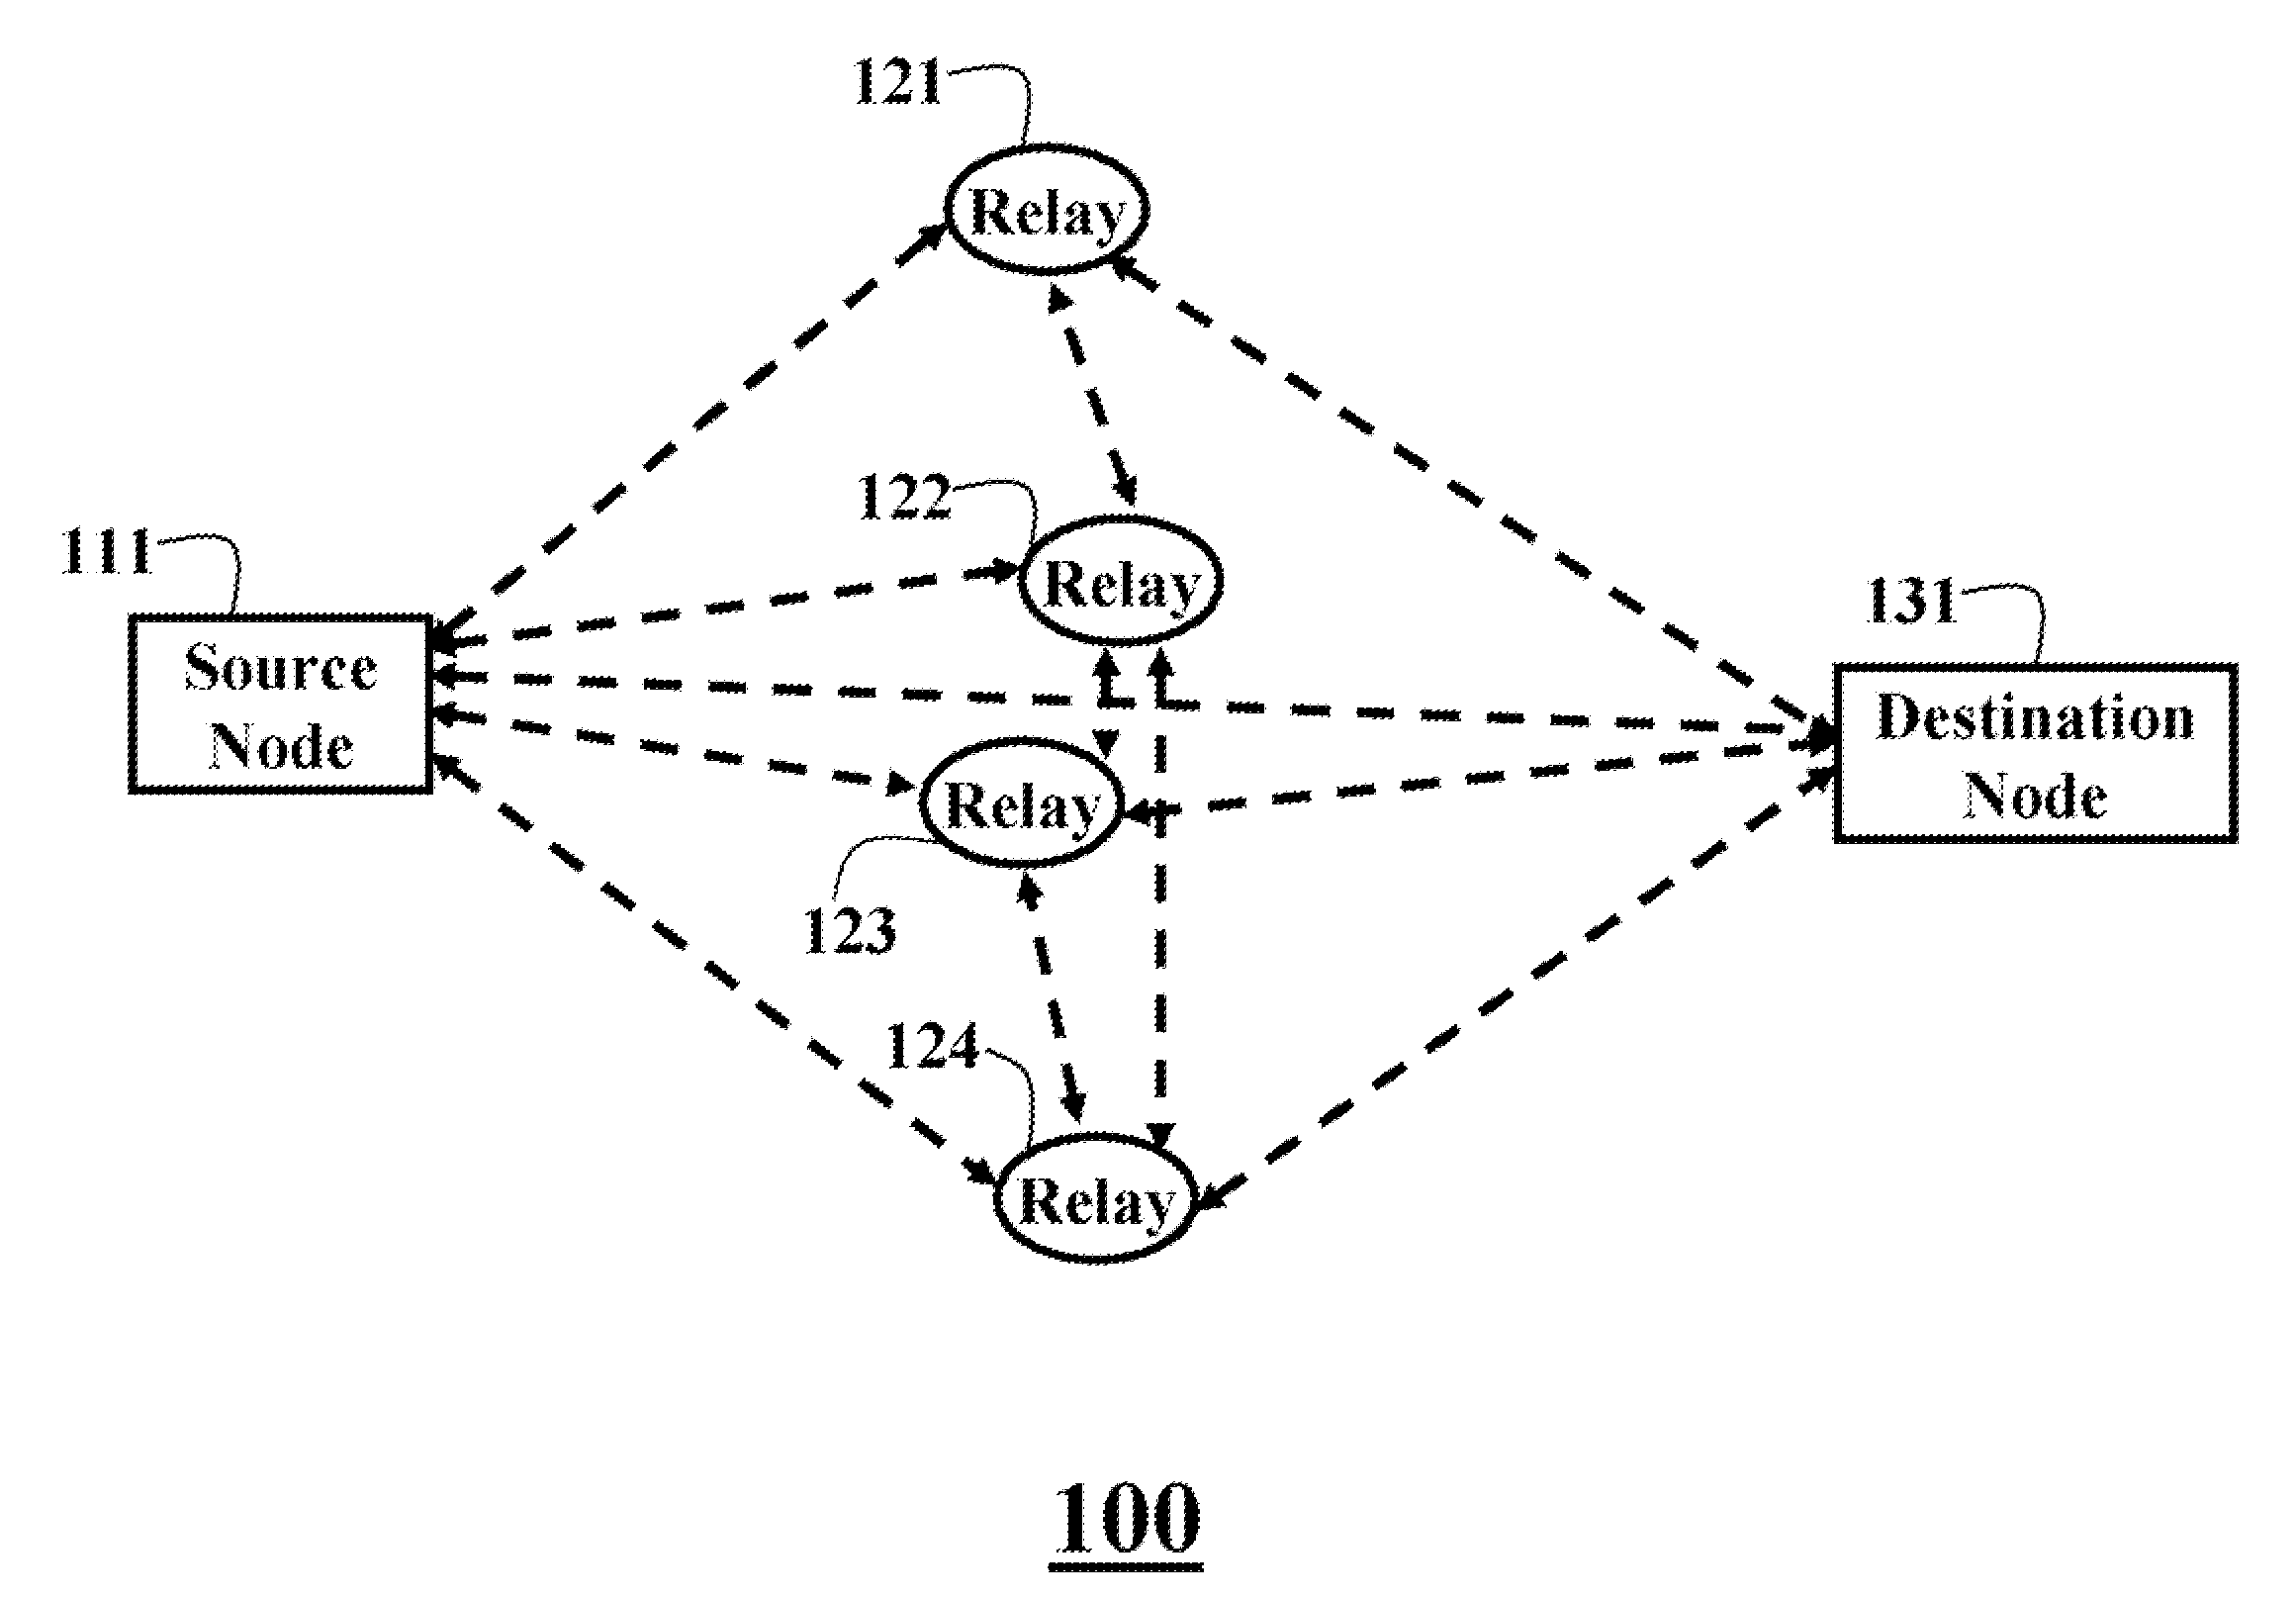 Cooperative Routing in Wireless Networks using Mutual-Information Accumulation